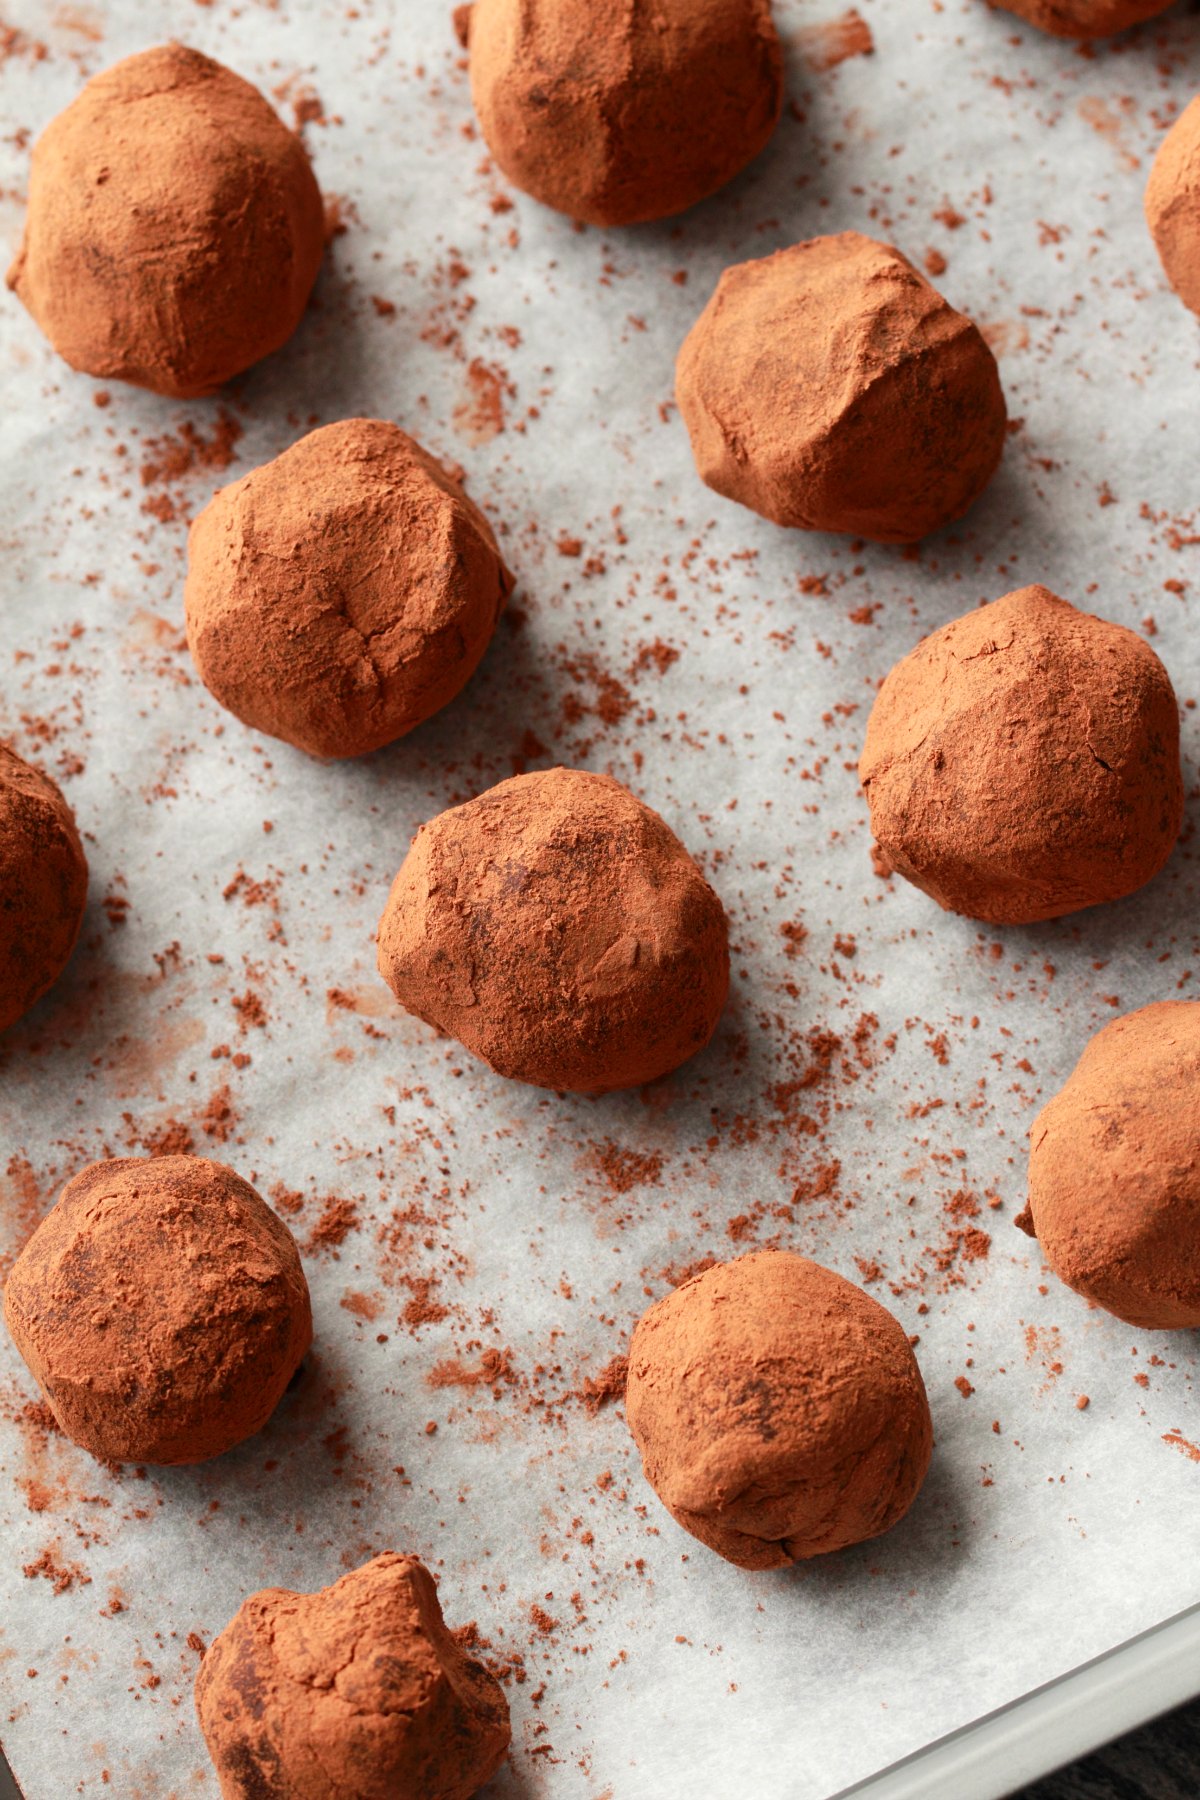 Vegan Chocolate Truffles lined up on parchment paper.